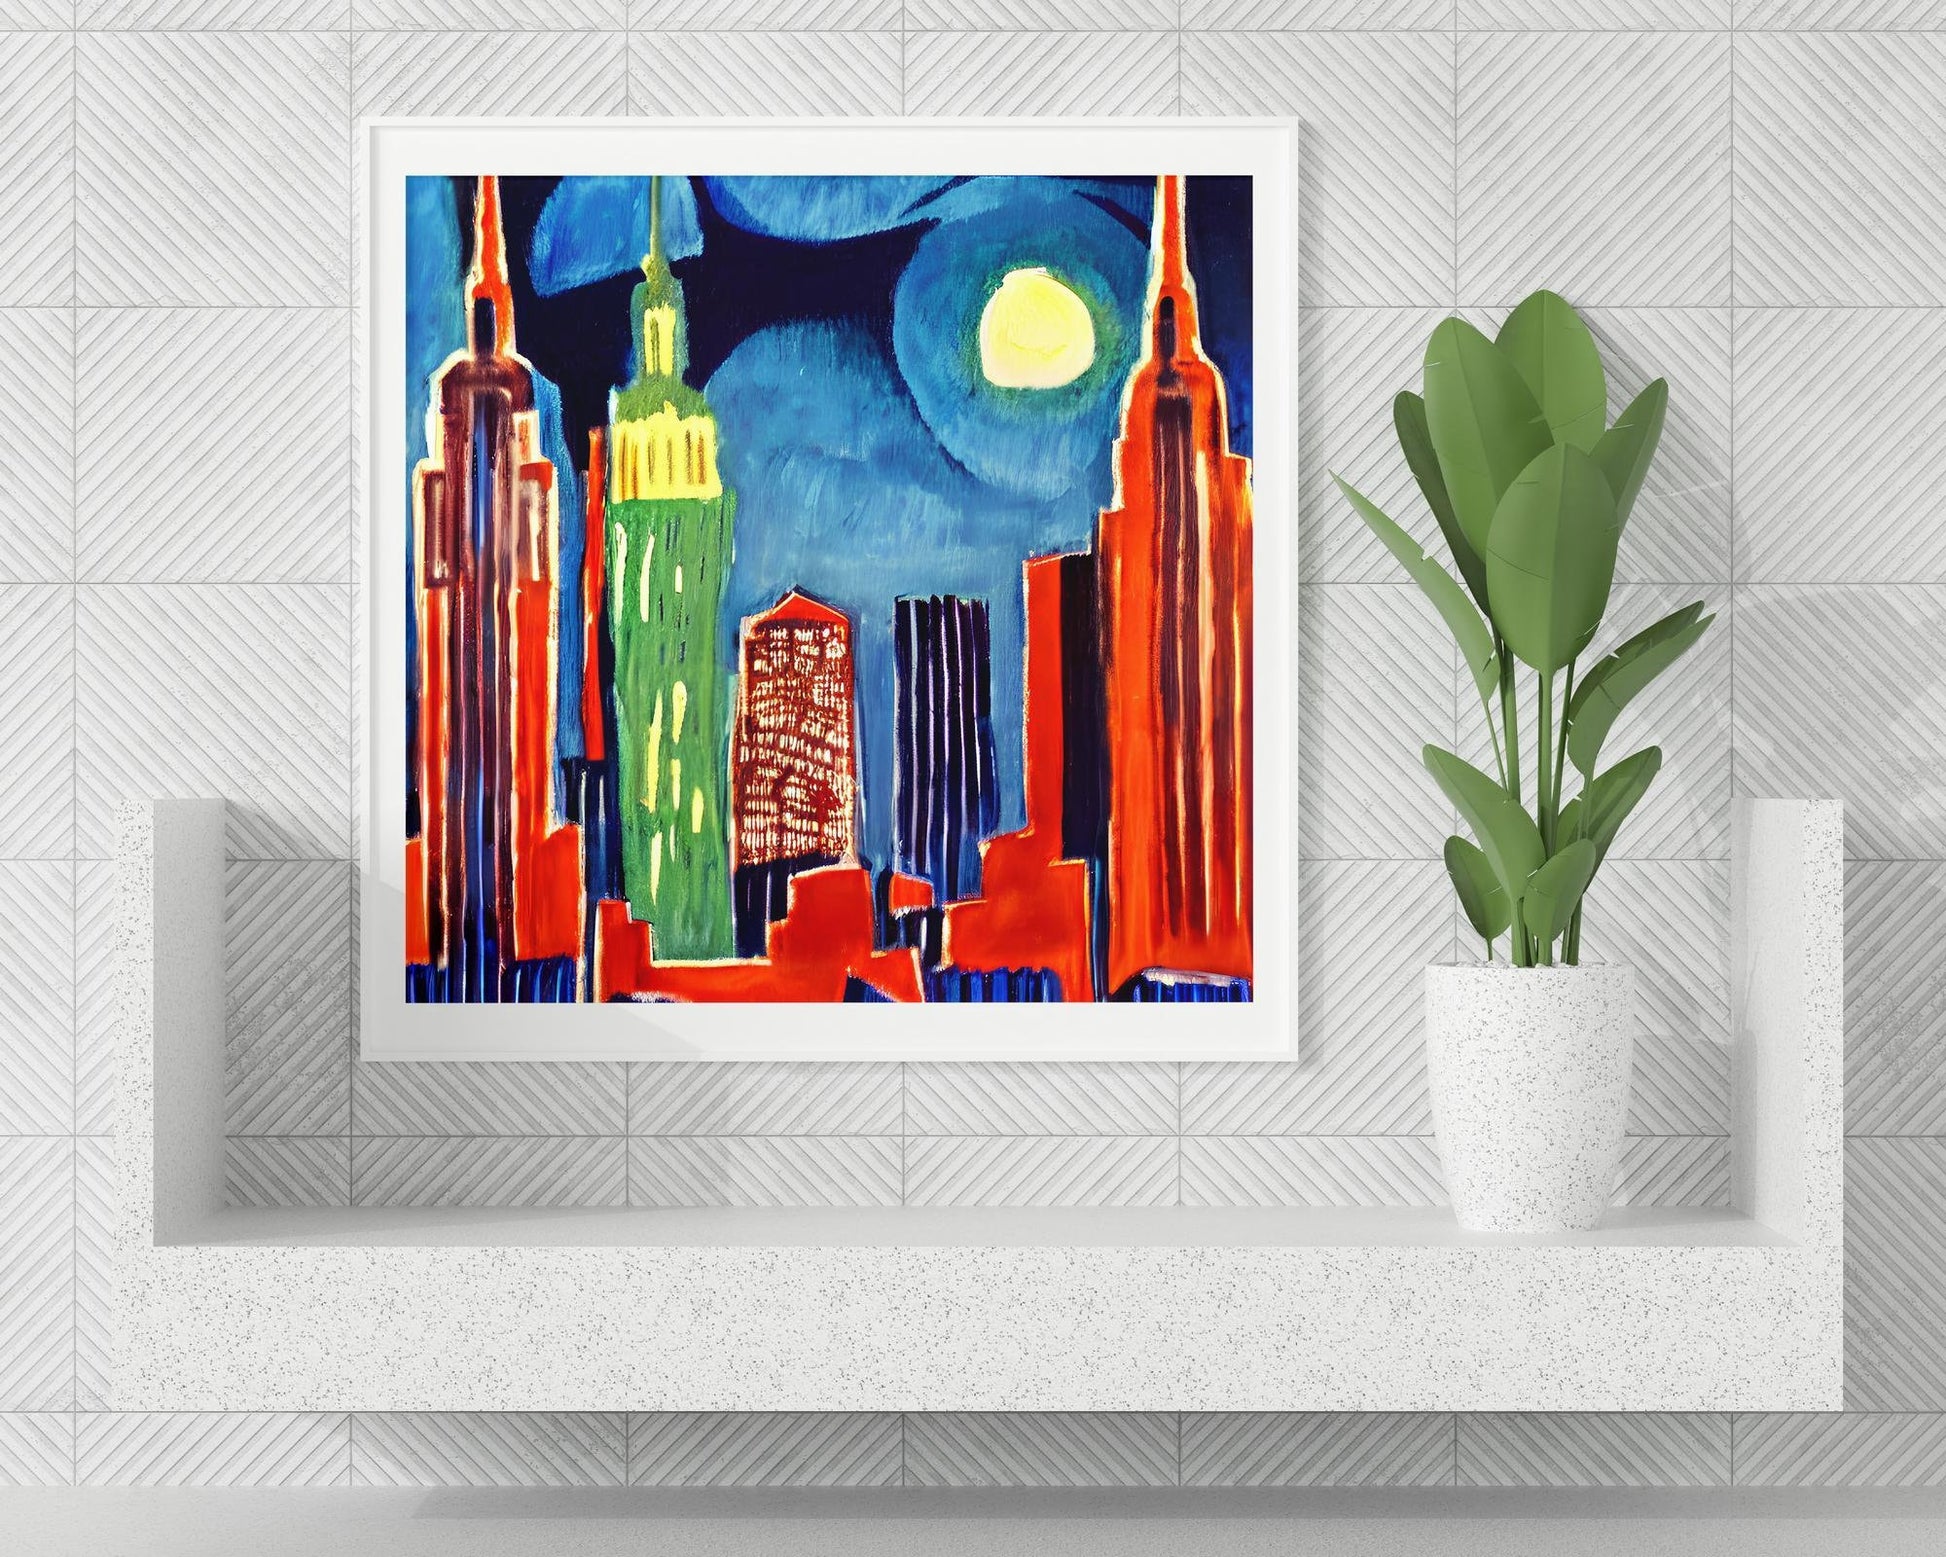 New York Empire State Building Night View, Wall Art, Travel Poster, Travel Poster, Nyc Travel Poster, Aesthetic Poster, Framed Art Print